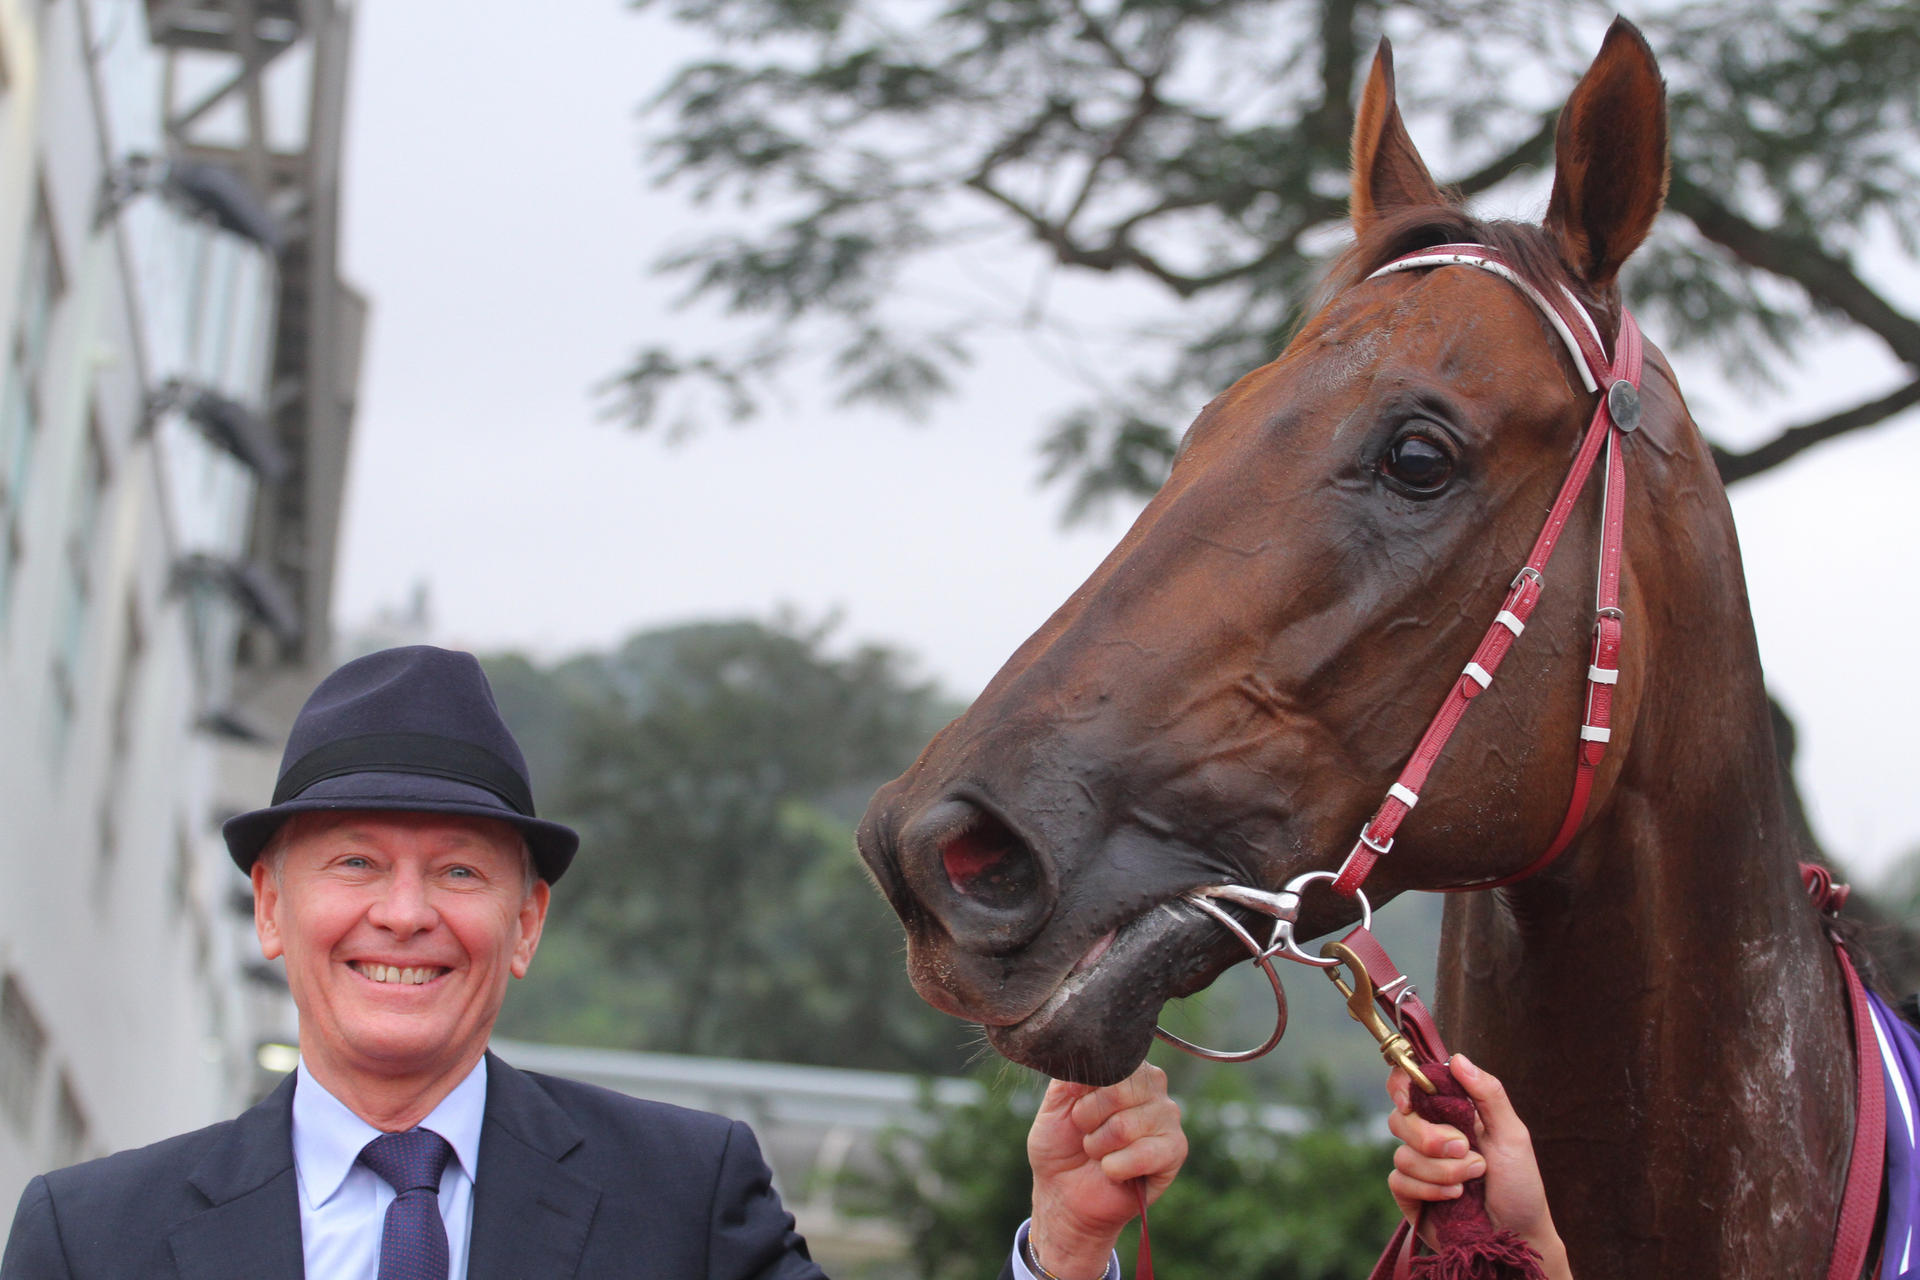 Trainer John Moore says Able Friend is a "gentle giant"and "nothing fazes him". Photos: Kenneth Chan 
